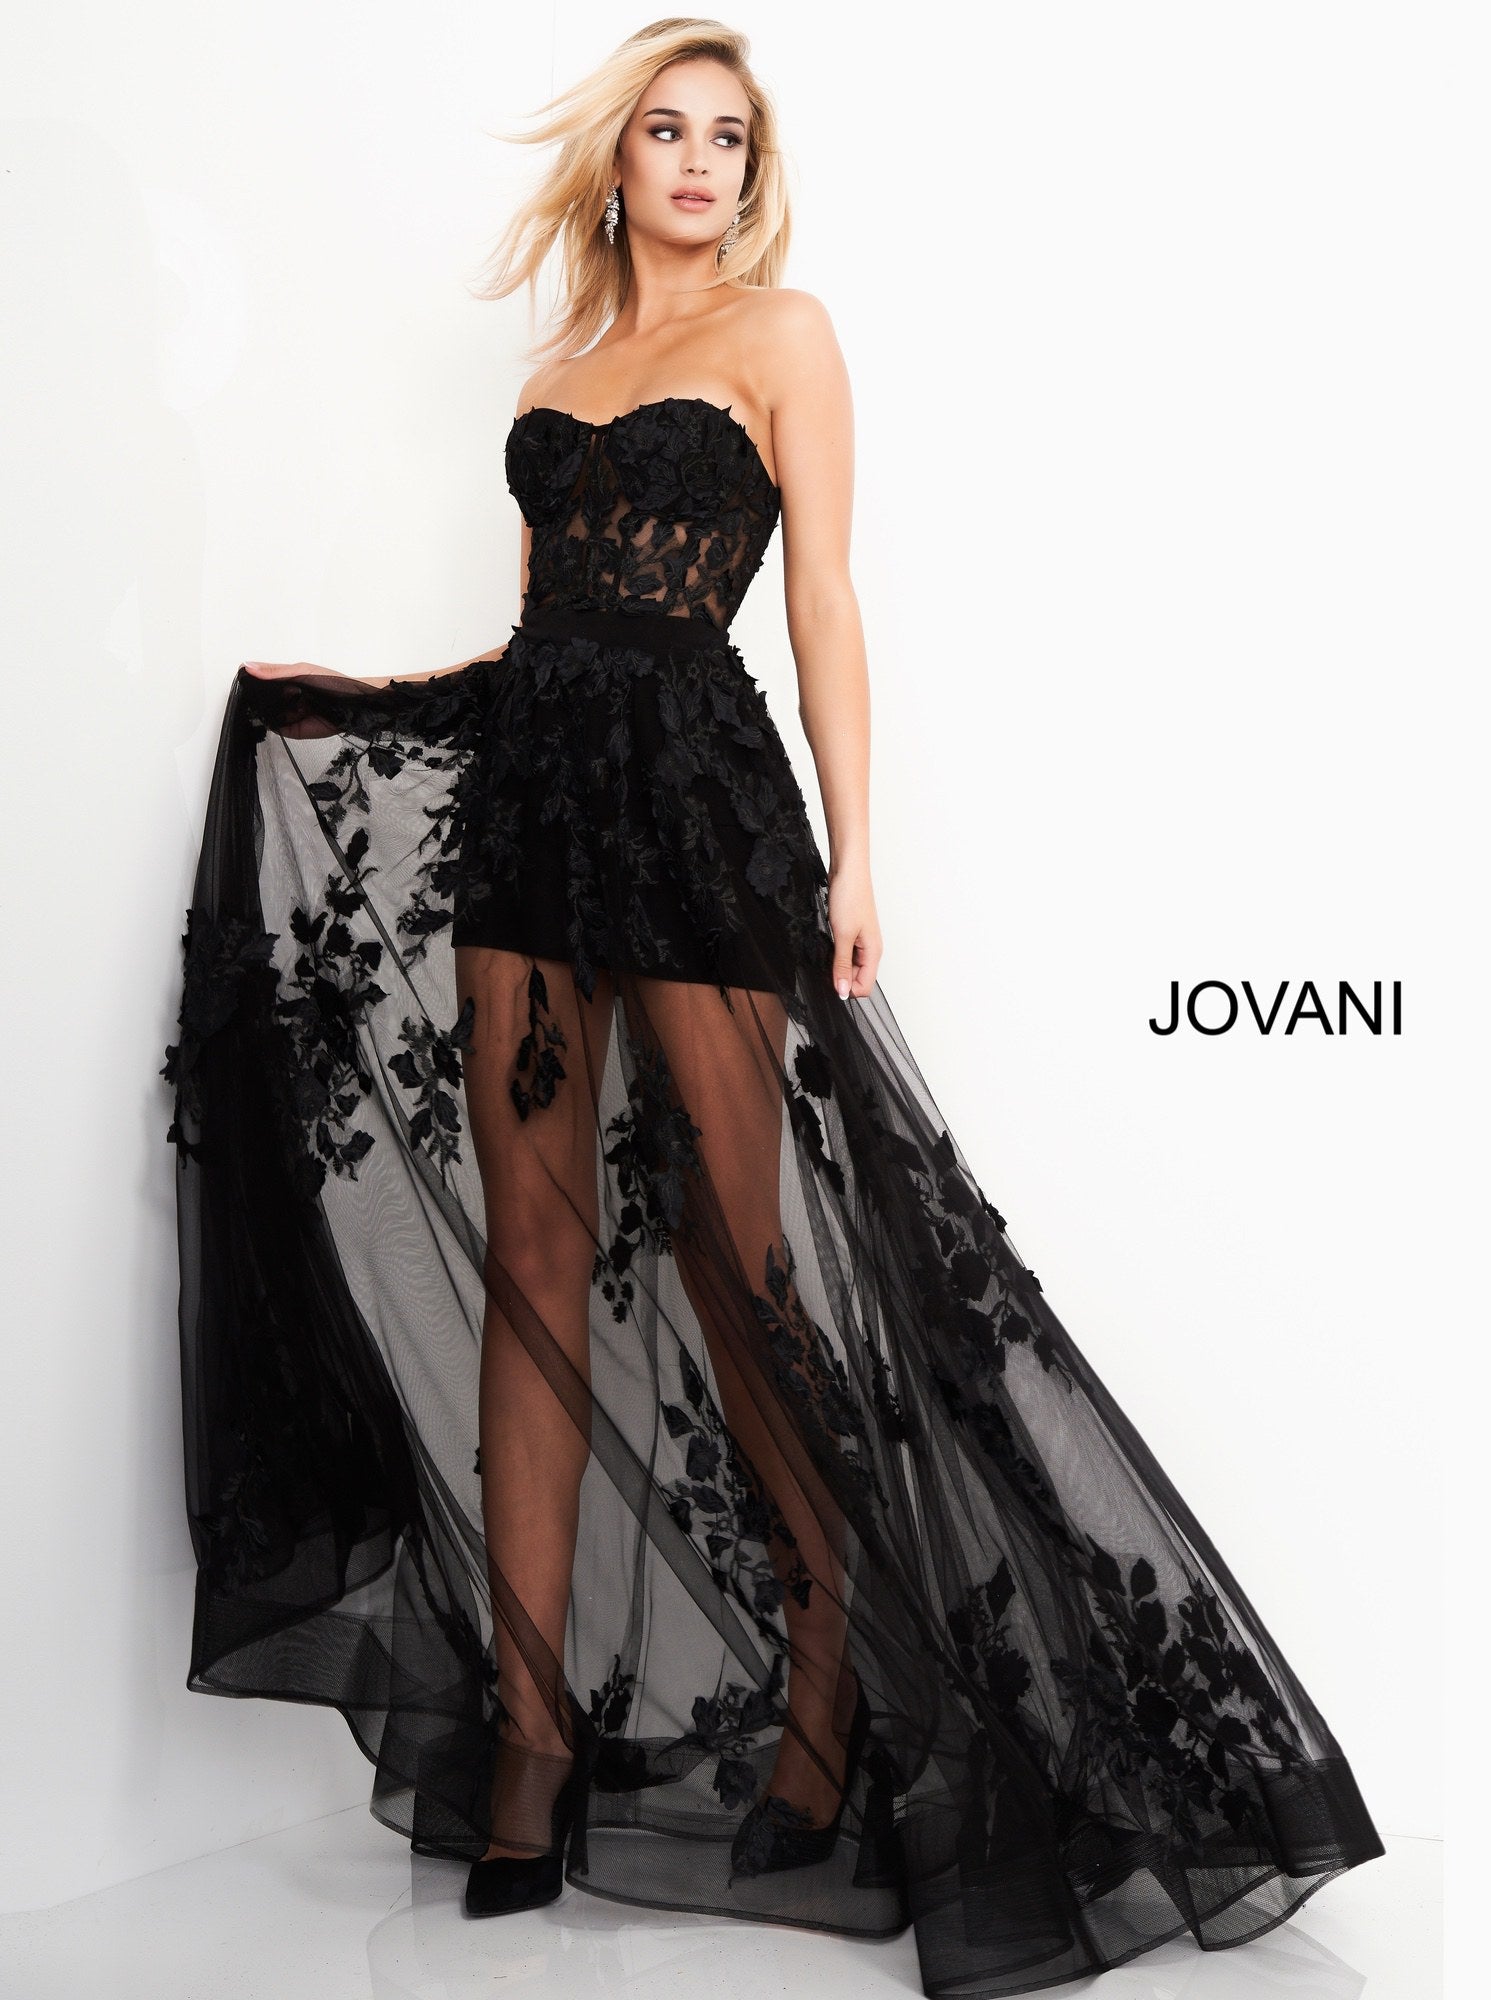 Jovani 02845 is a 2020 maxi prom dress with a mini skirt under skirt. Sheer lace Embellished floral appliques. Sheer Strapless corset bodice with boning. Sheer Corset Maxi Skirt Prom Dress Mini Lace Sexy Formal Gown 2020